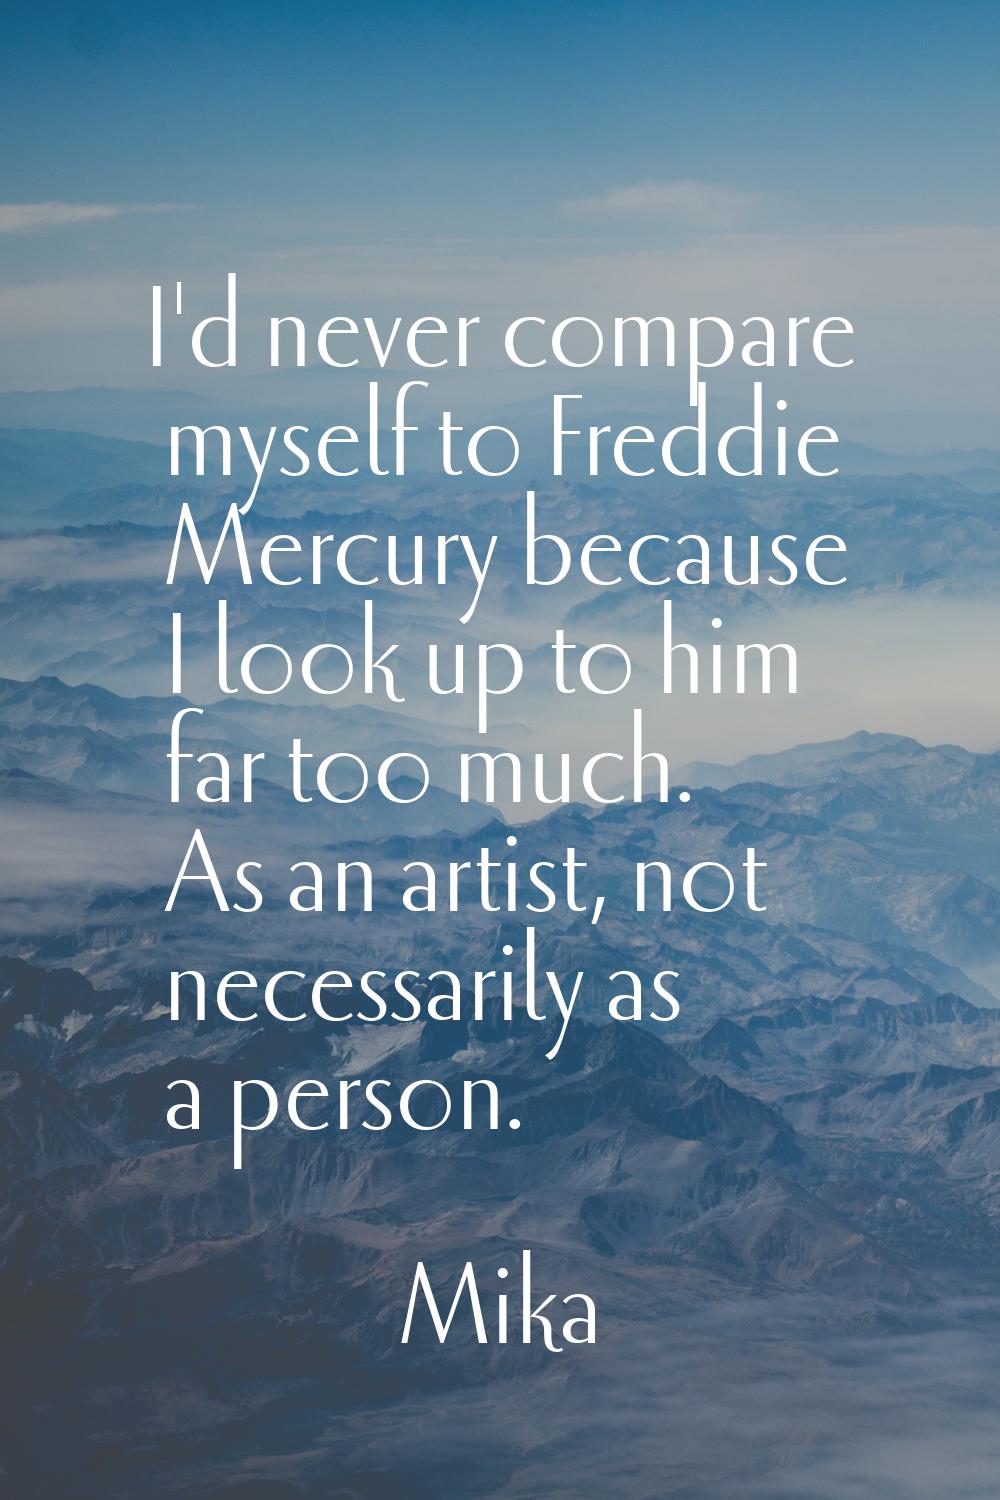 I'd never compare myself to Freddie Mercury because I look up to him far too much. As an artist, no